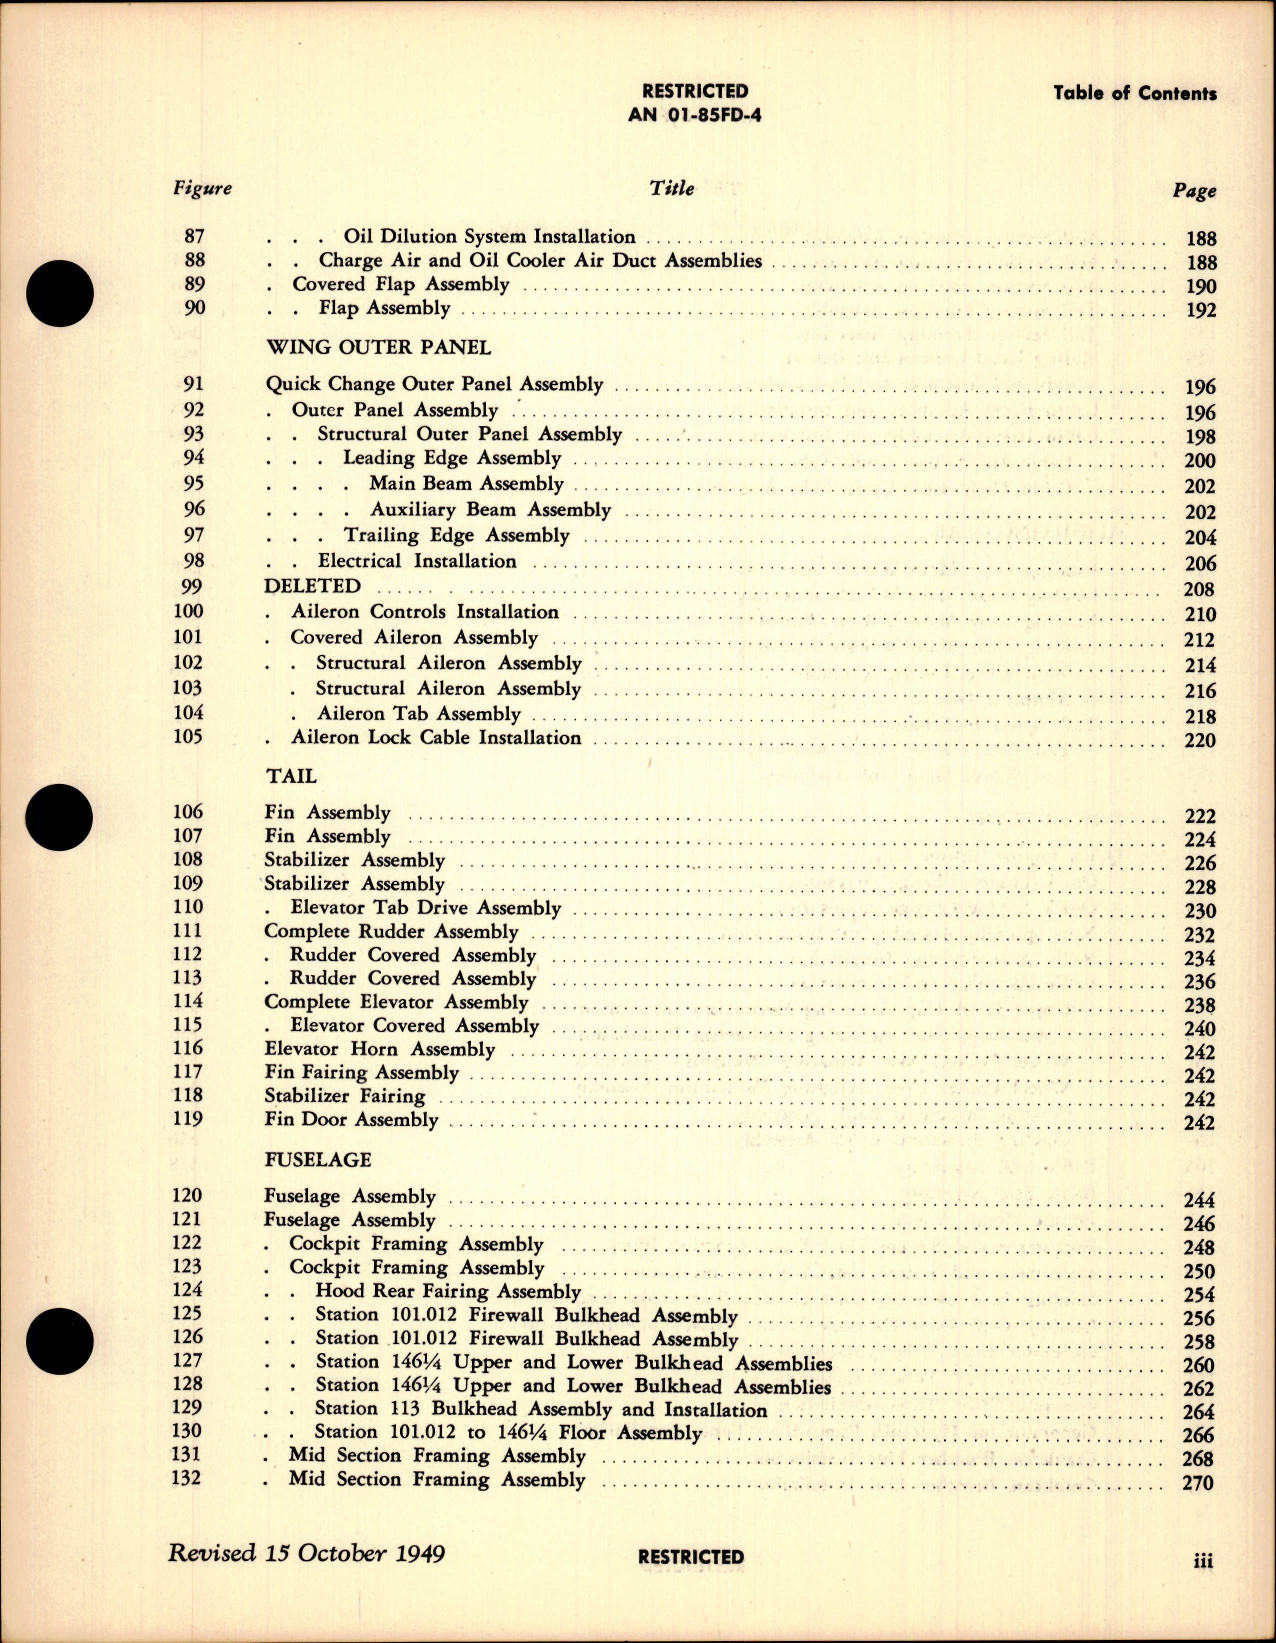 Sample page 7 from AirCorps Library document: Parts Catalog for Navy Models F8F-1, F8F-1B, F8F-1N, F8F-2, F8F-2N, F8F-2P